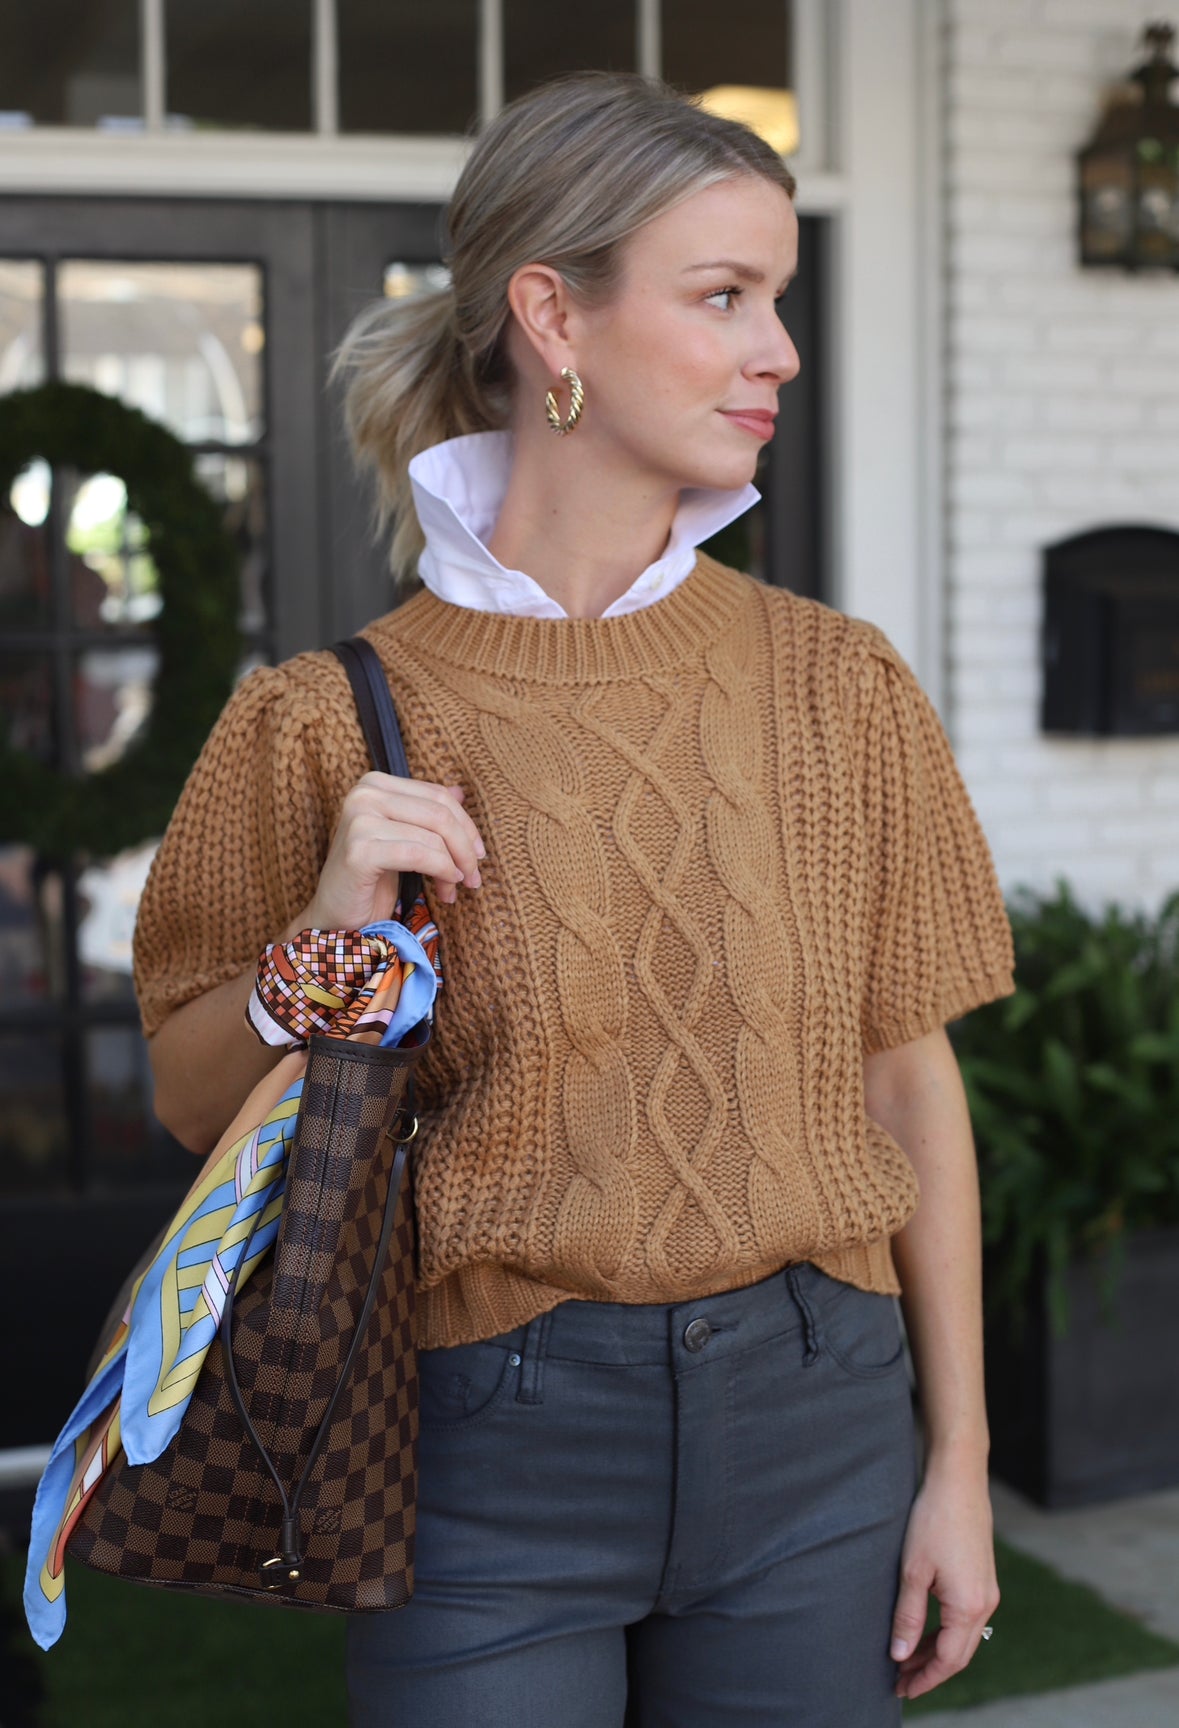 The Knit Sweater